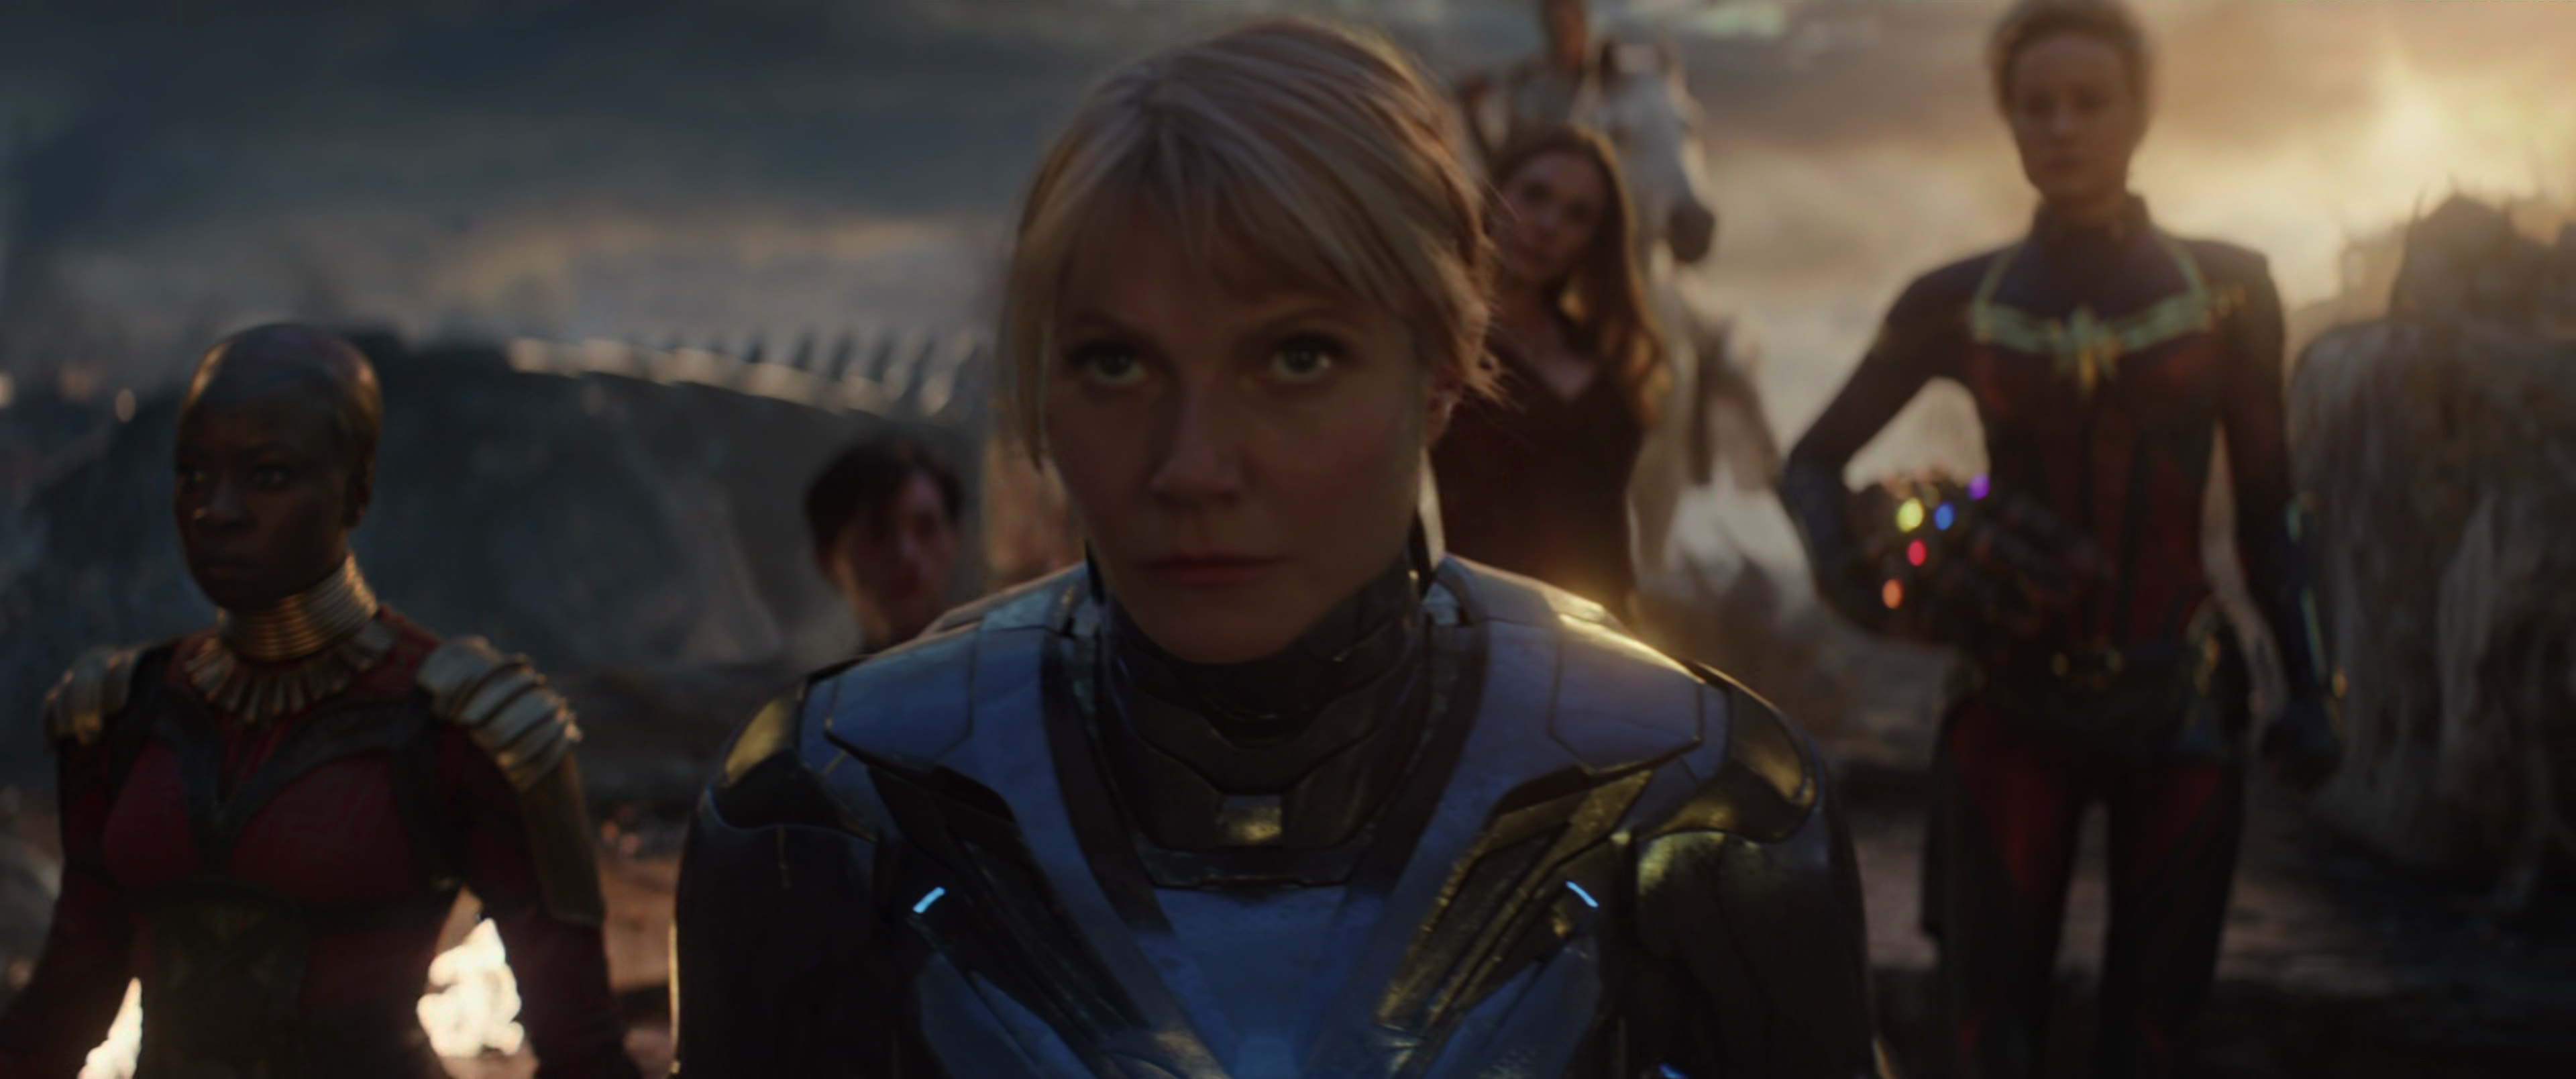 Pepper Potts (Gwenyth Paltrow) prepares to lead the female Avengers into battle in Avengers: Endgame (2019), Marvel Entertainmetn